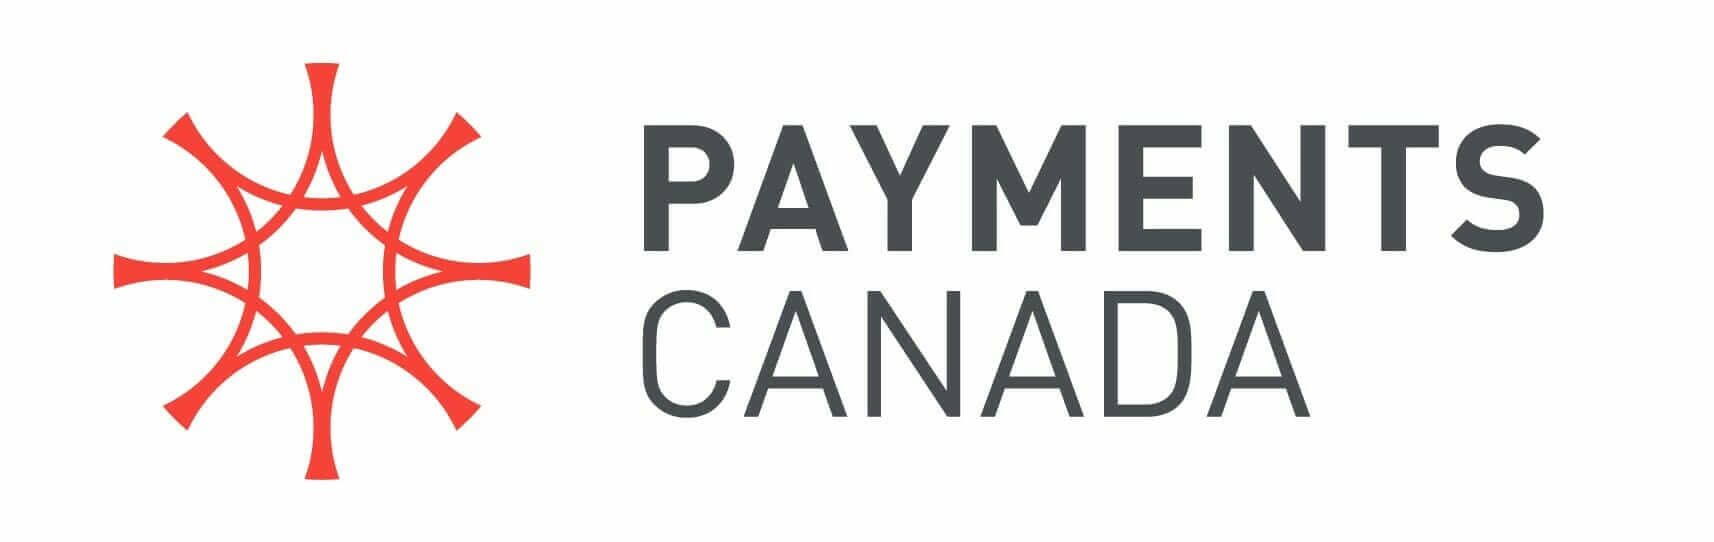 CPA, Payments Canada, Pre-Authorized Debit